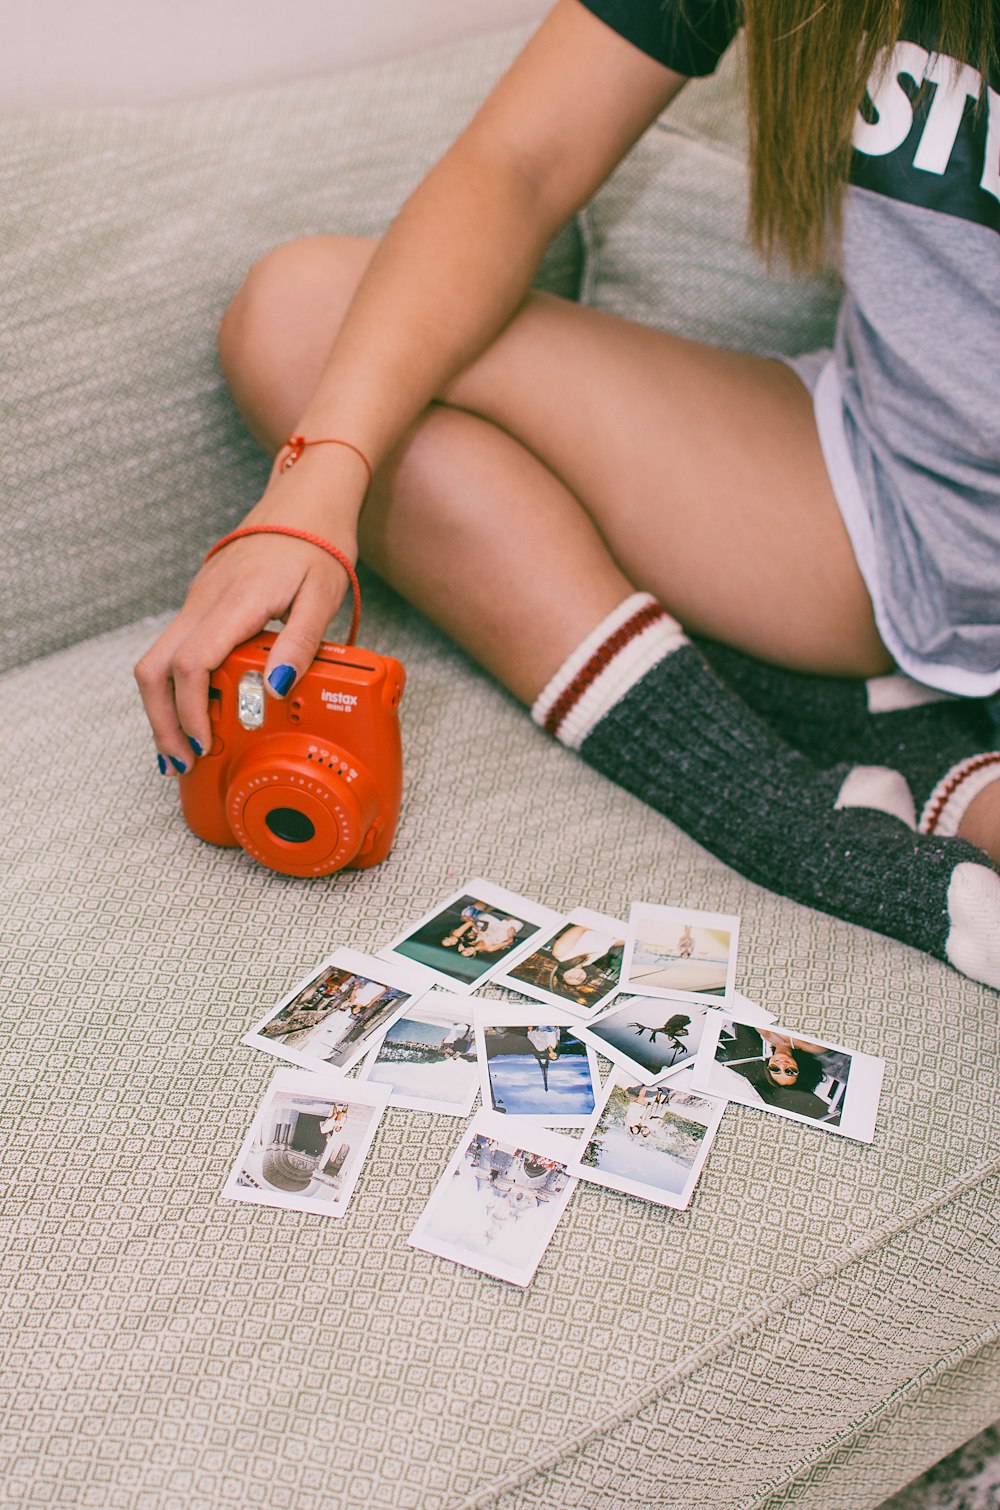 person sitting on couch holding red instant camera